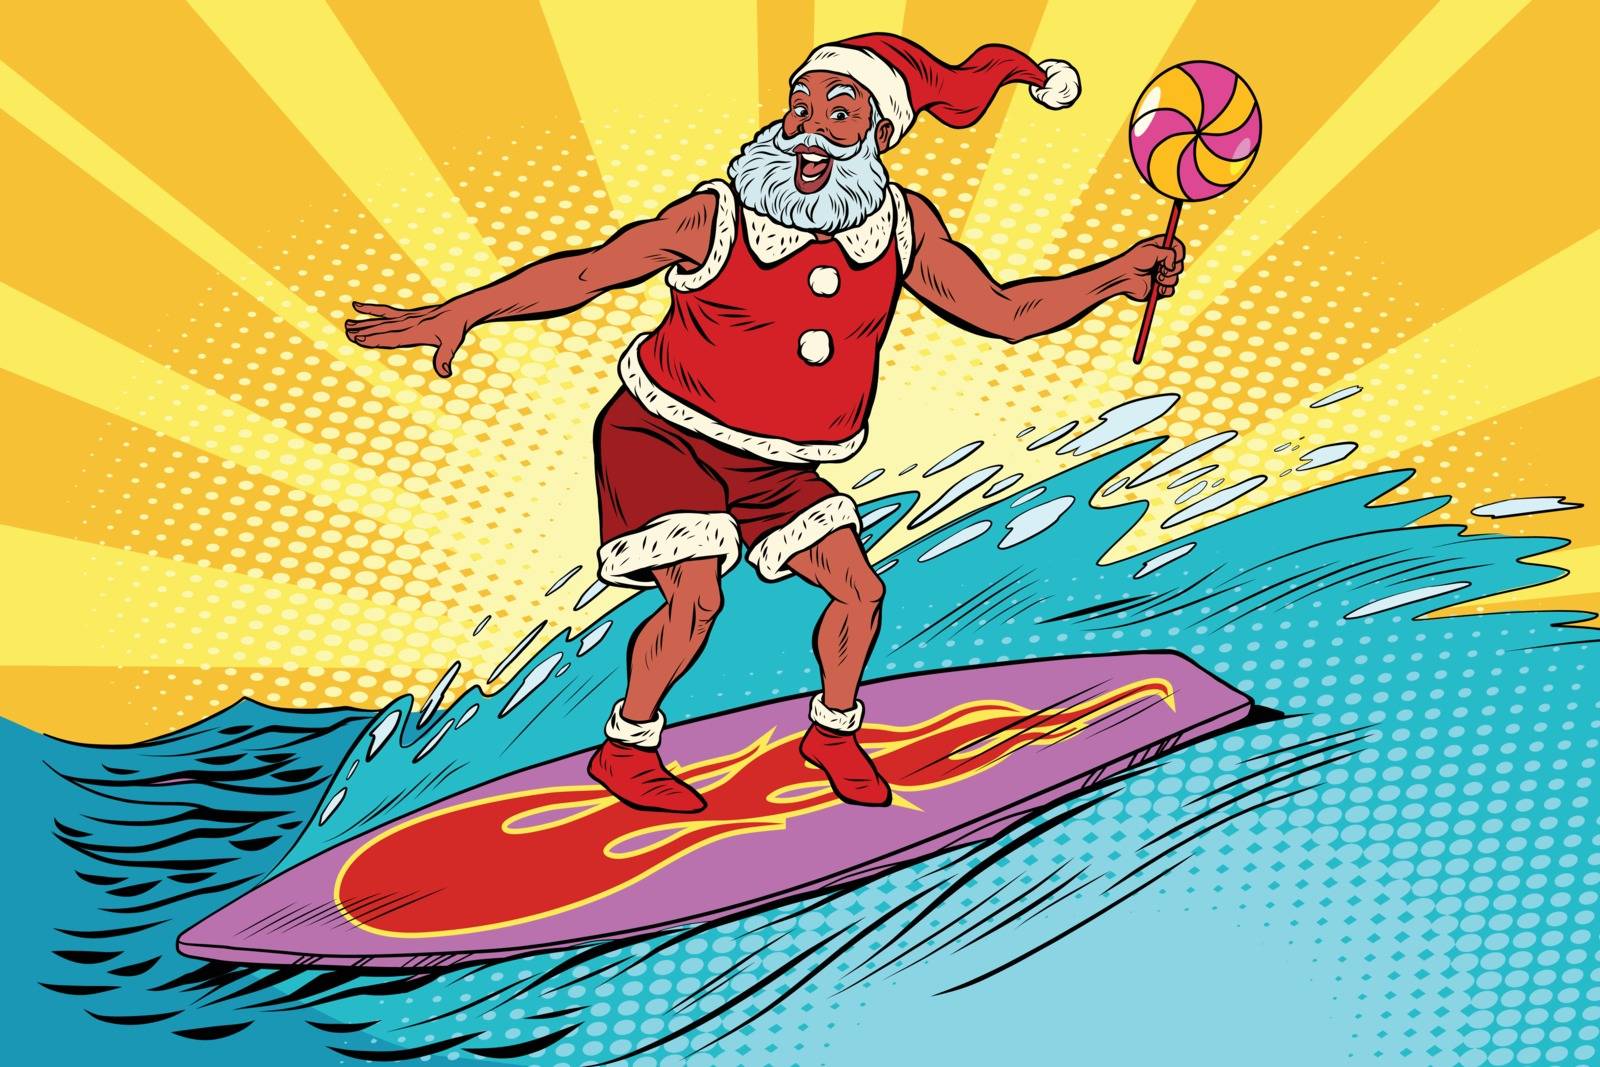 Sports Santa Claus on a surfboard, pop art retro comic book vector illustration. New year and Christmas